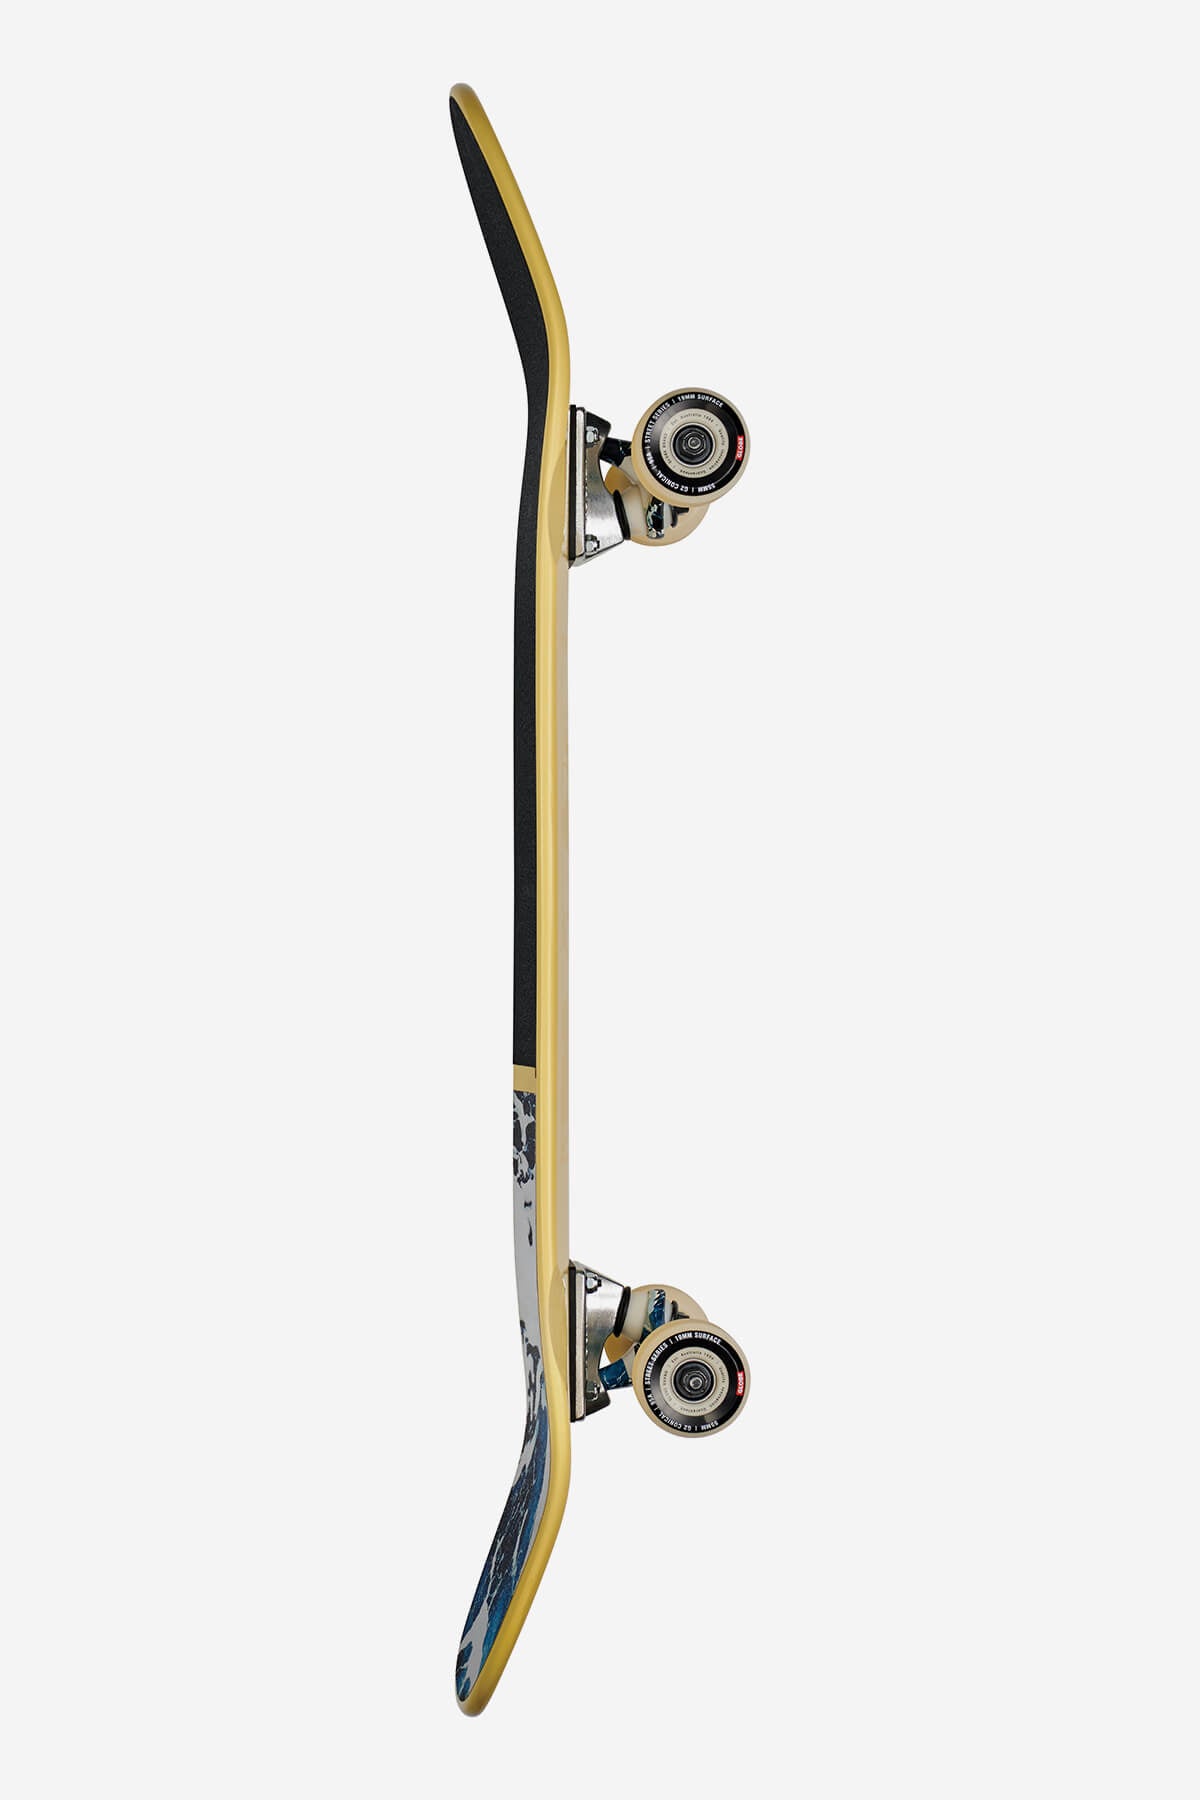 Globe - Shooter - Yellow/Comehell - 8.625" complet Skateboard